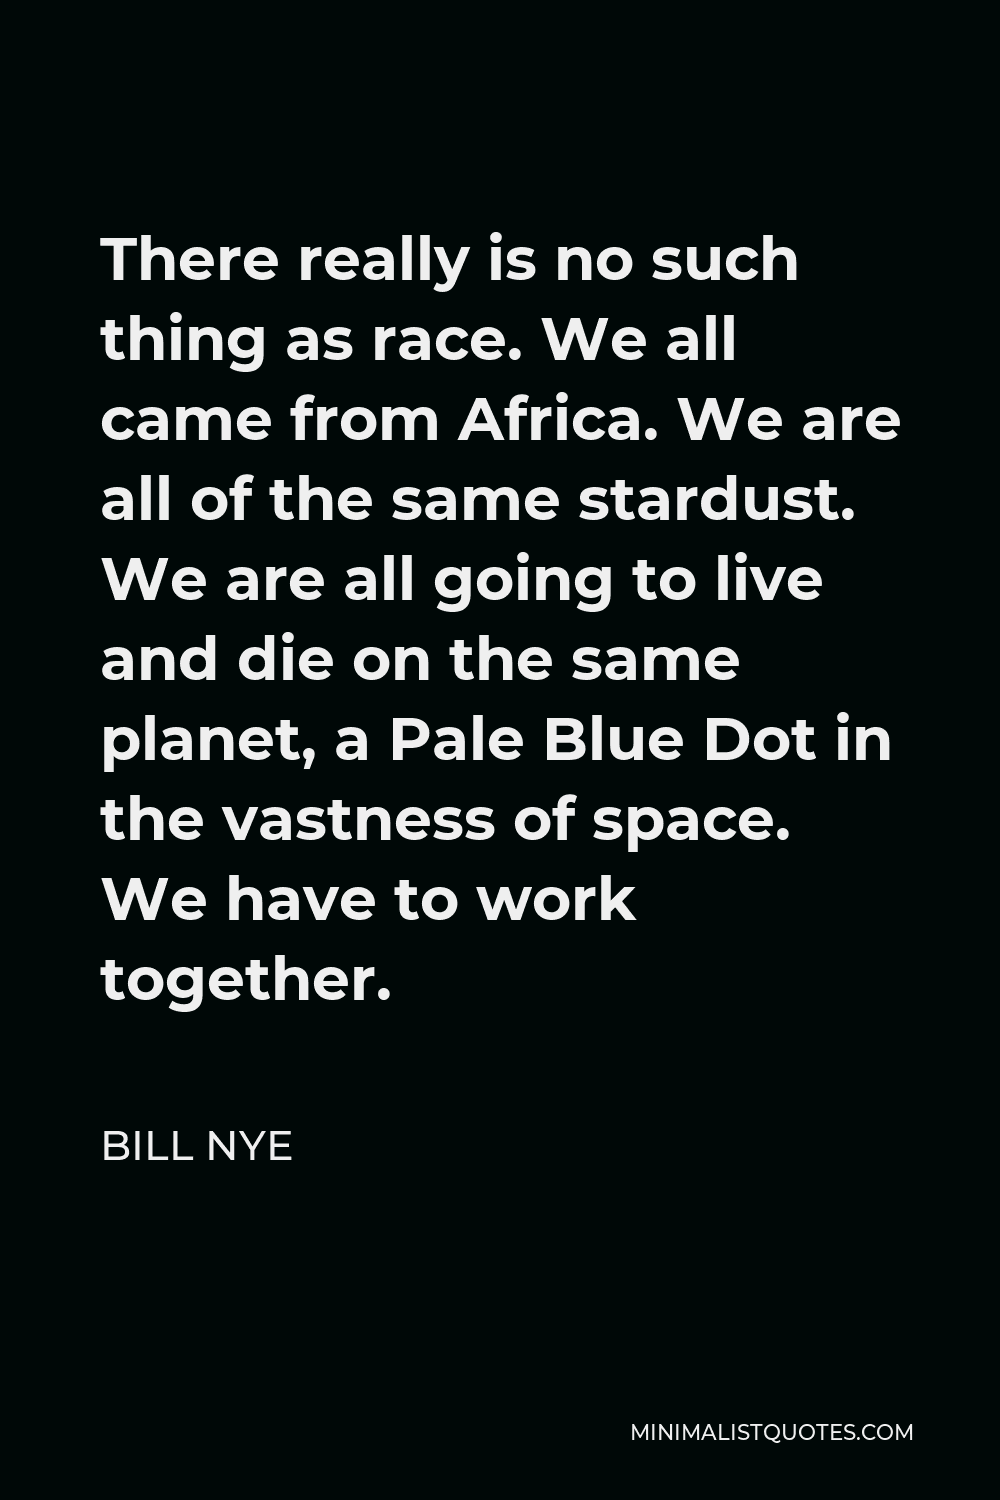 Bill Nye Quote - There really is no such thing as race. We all came from Africa. We are all of the same stardust. We are all going to live and die on the same planet, a Pale Blue Dot in the vastness of space. We have to work together.